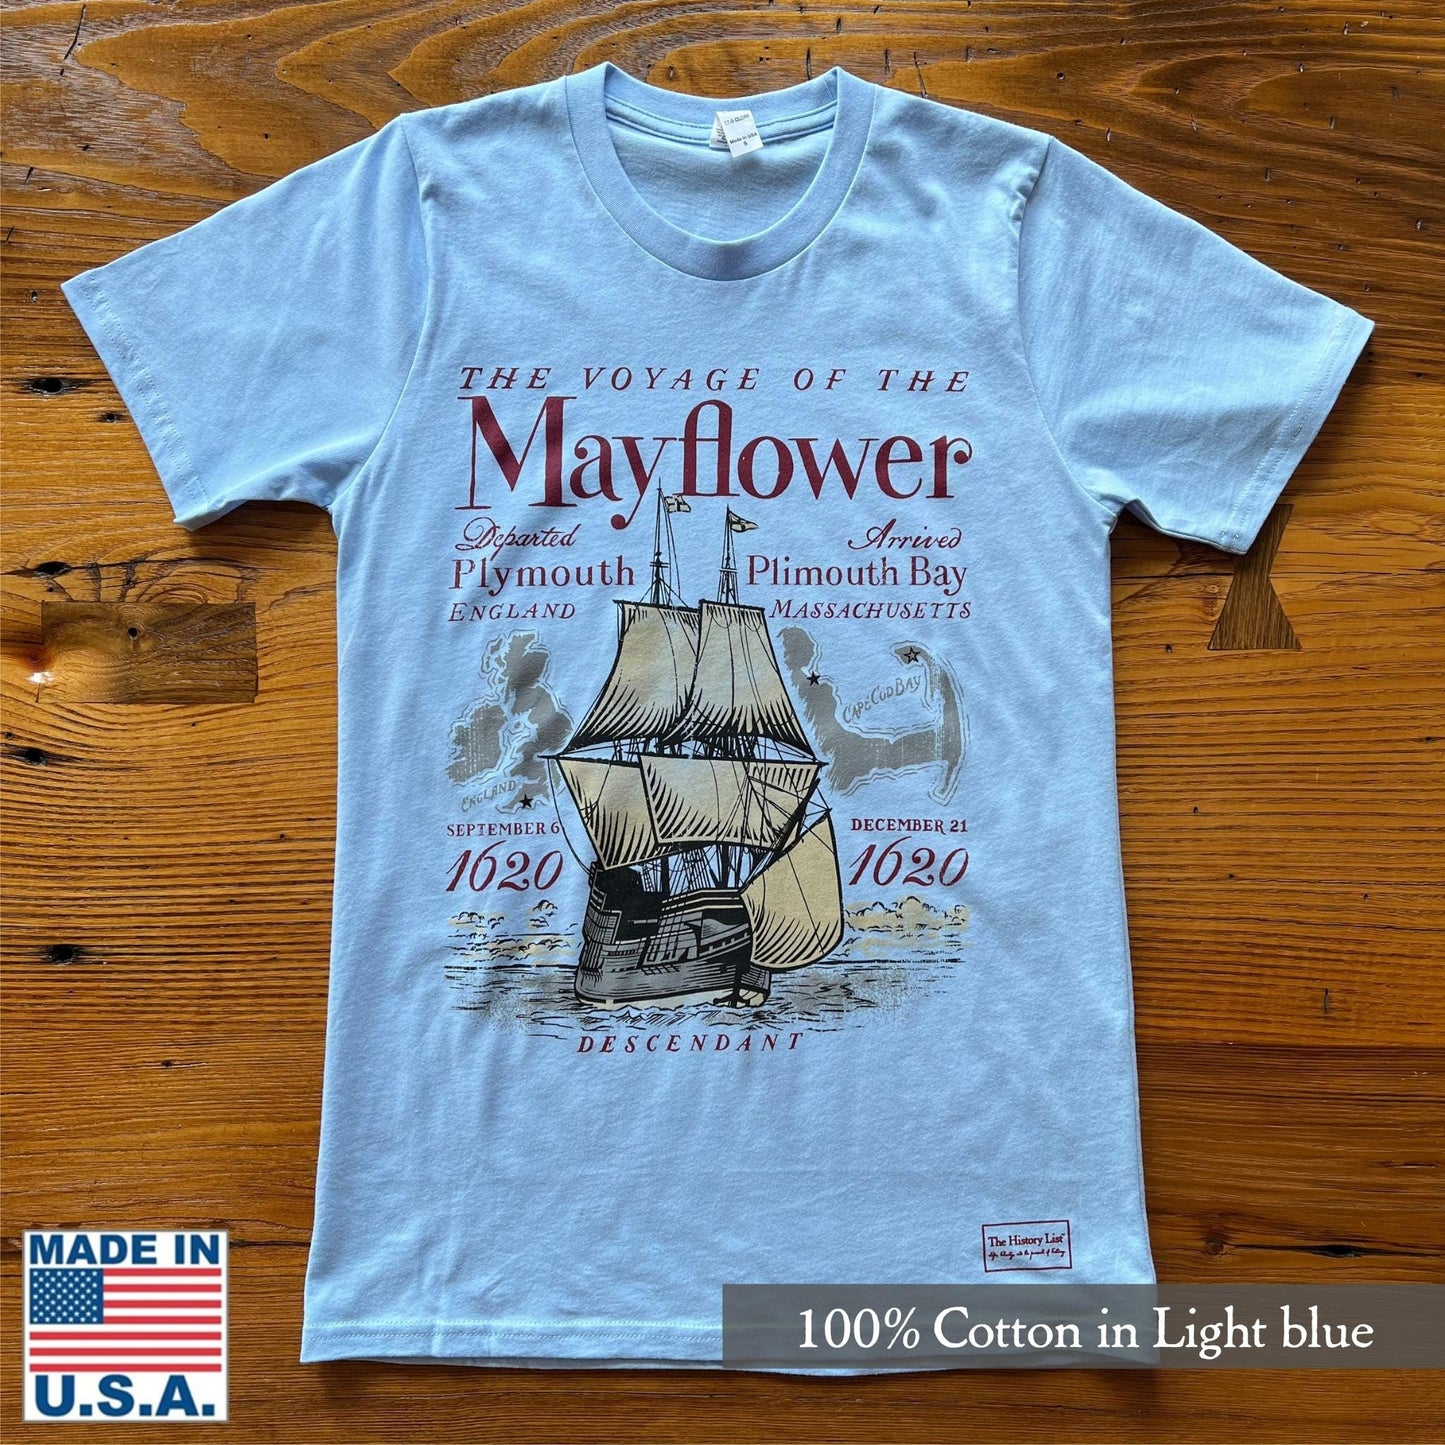 Light Blue - "The Voyage of the Mayflower" Shirt from the history list store - Made in USA